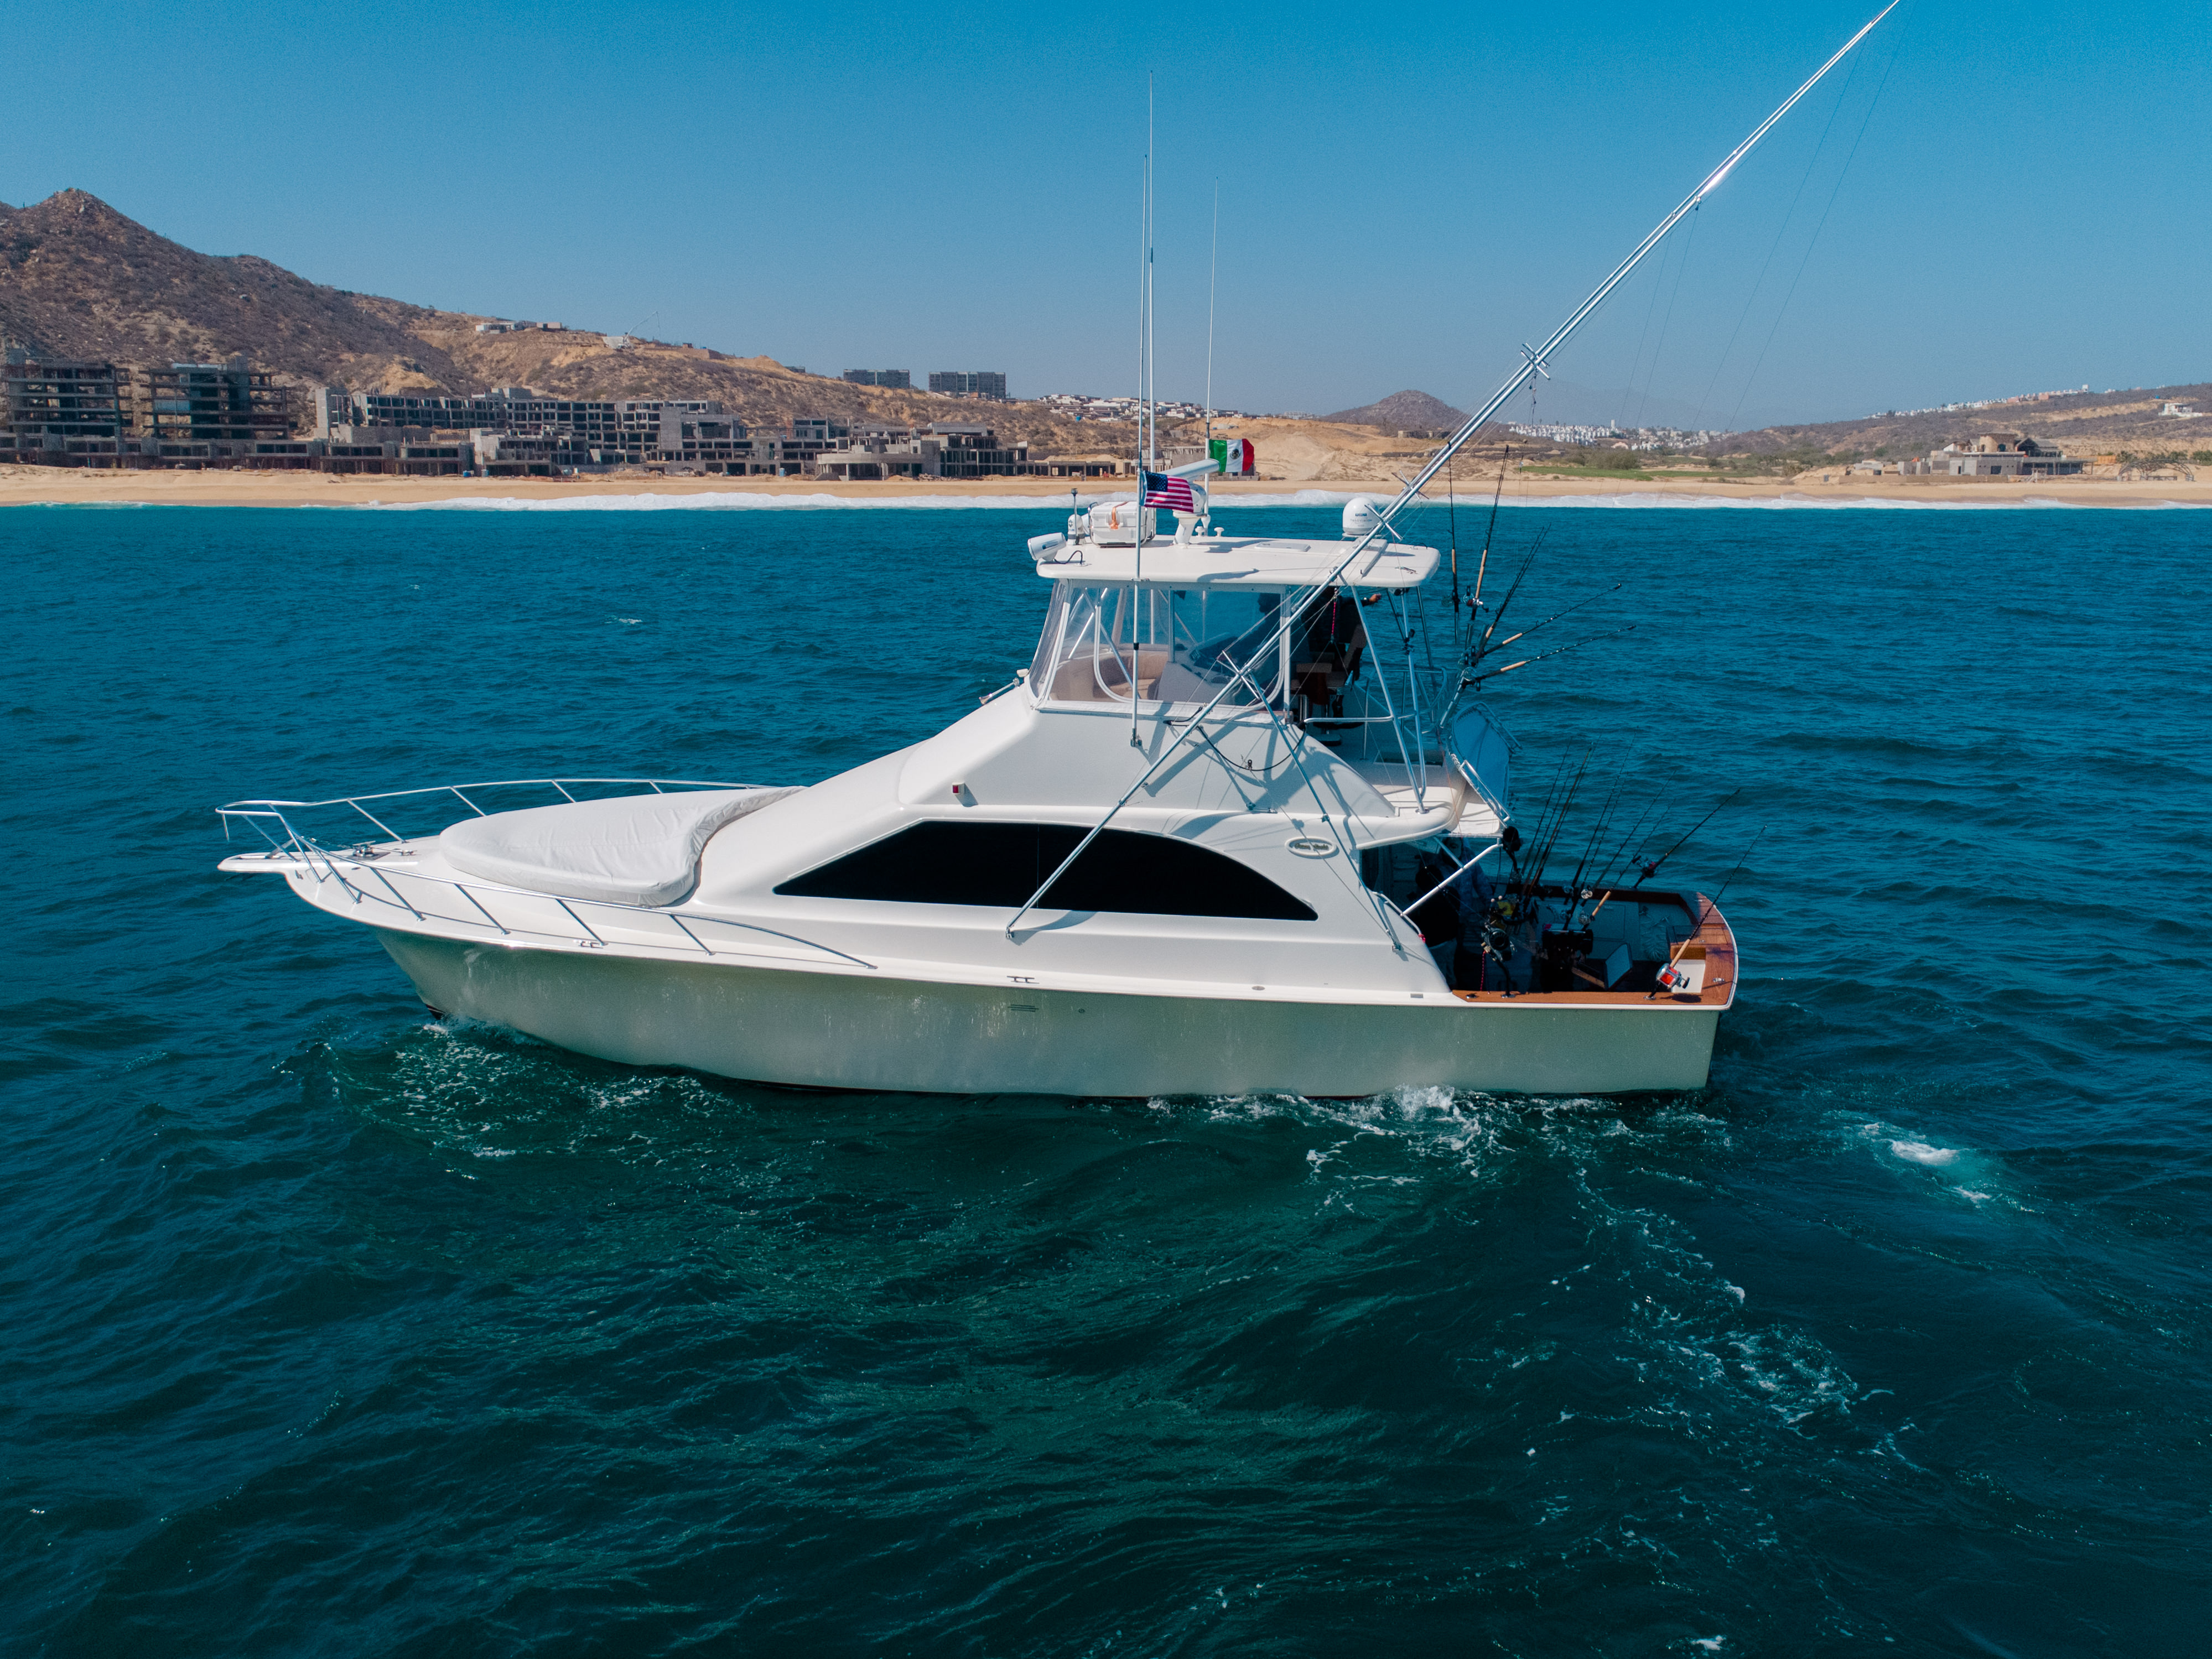 What not to do when fishing in Cabo San Lucas?